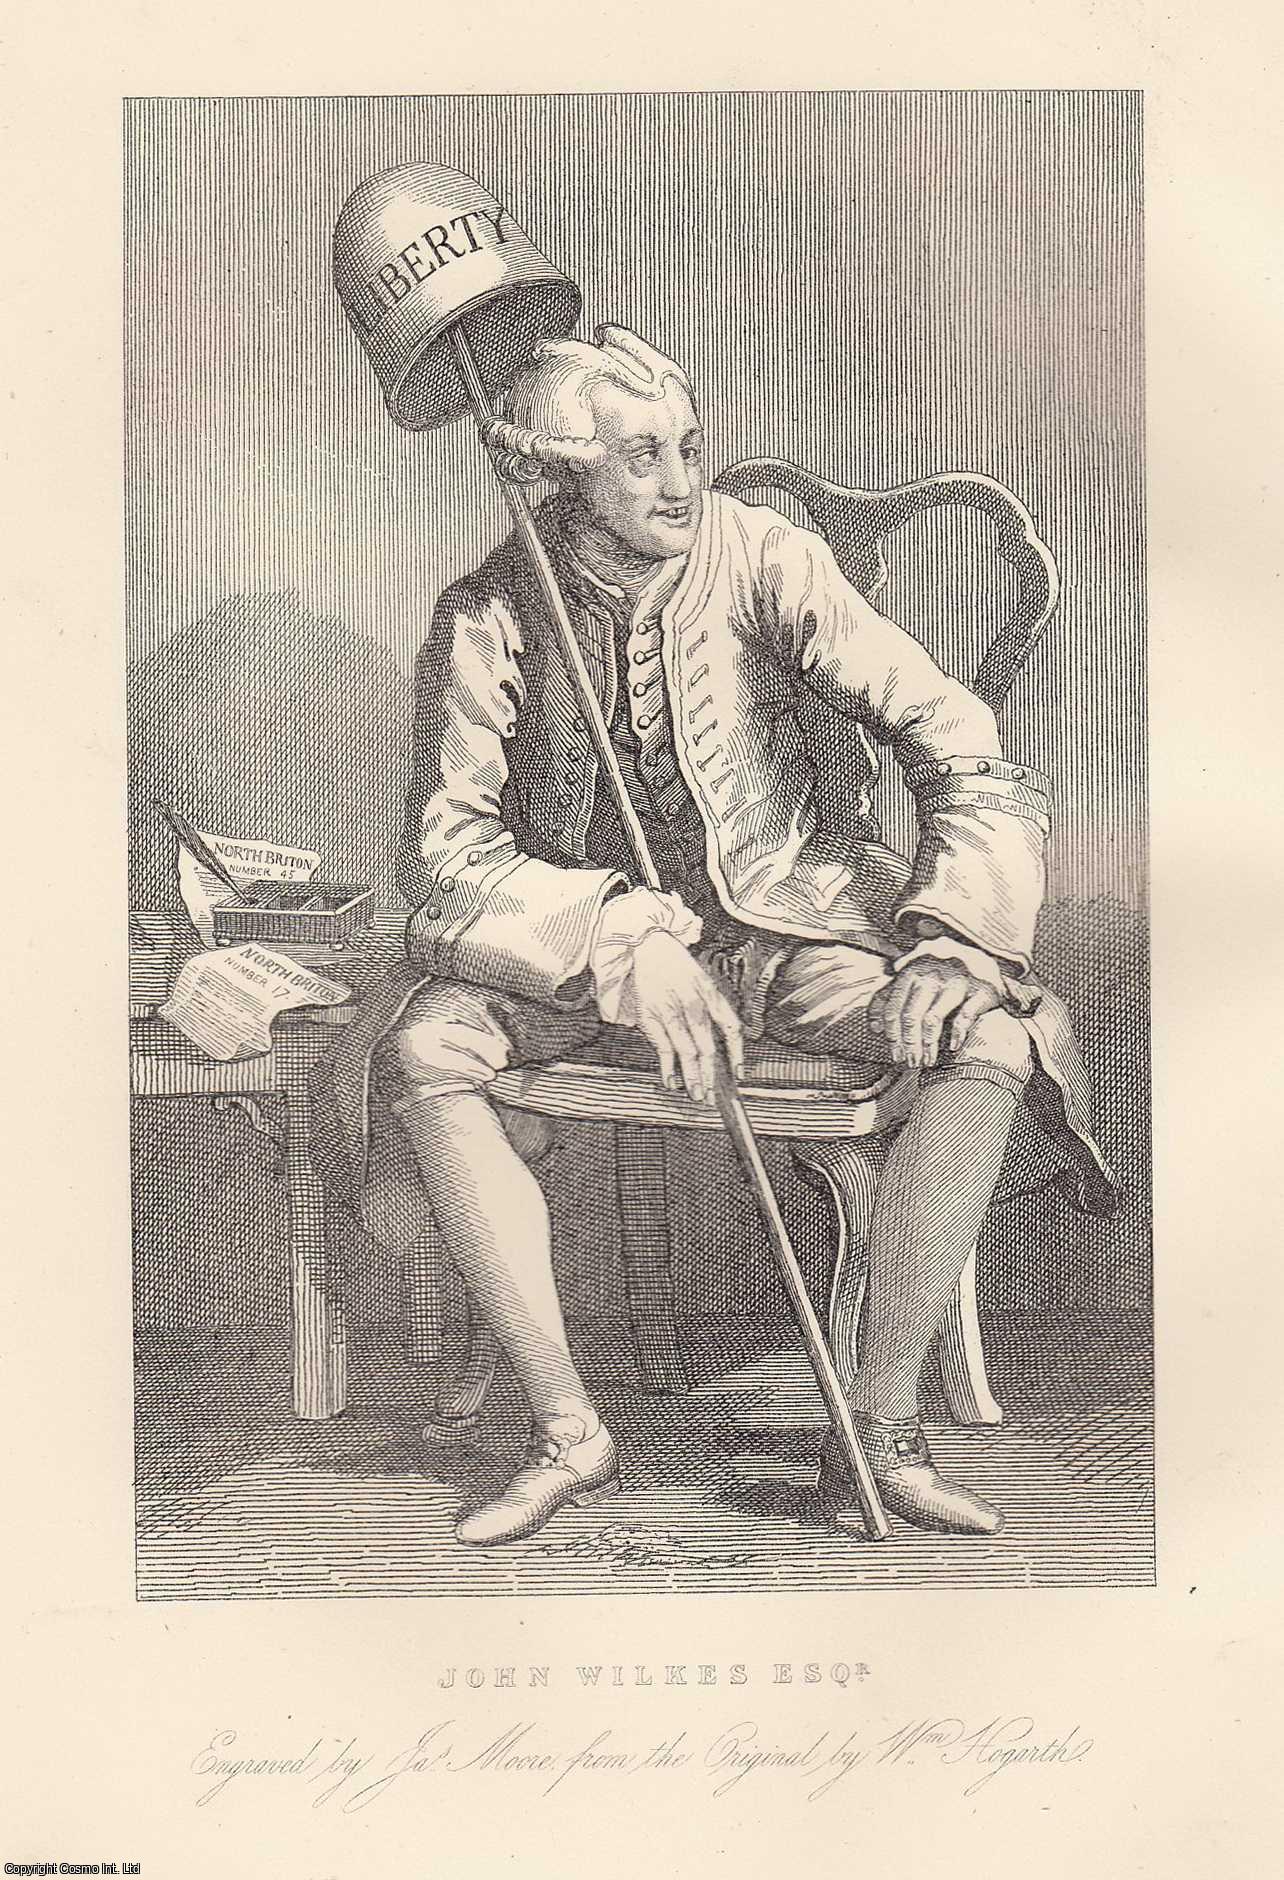 STEEL ENGRAVING - William Hogarth : John Wilkes, English radical journalist and politician. Steel engraving, image area 13 x 19 cms approx. This is an original 153 year old print separated from The Complete Works of William Hogarth, London, printed 1870.